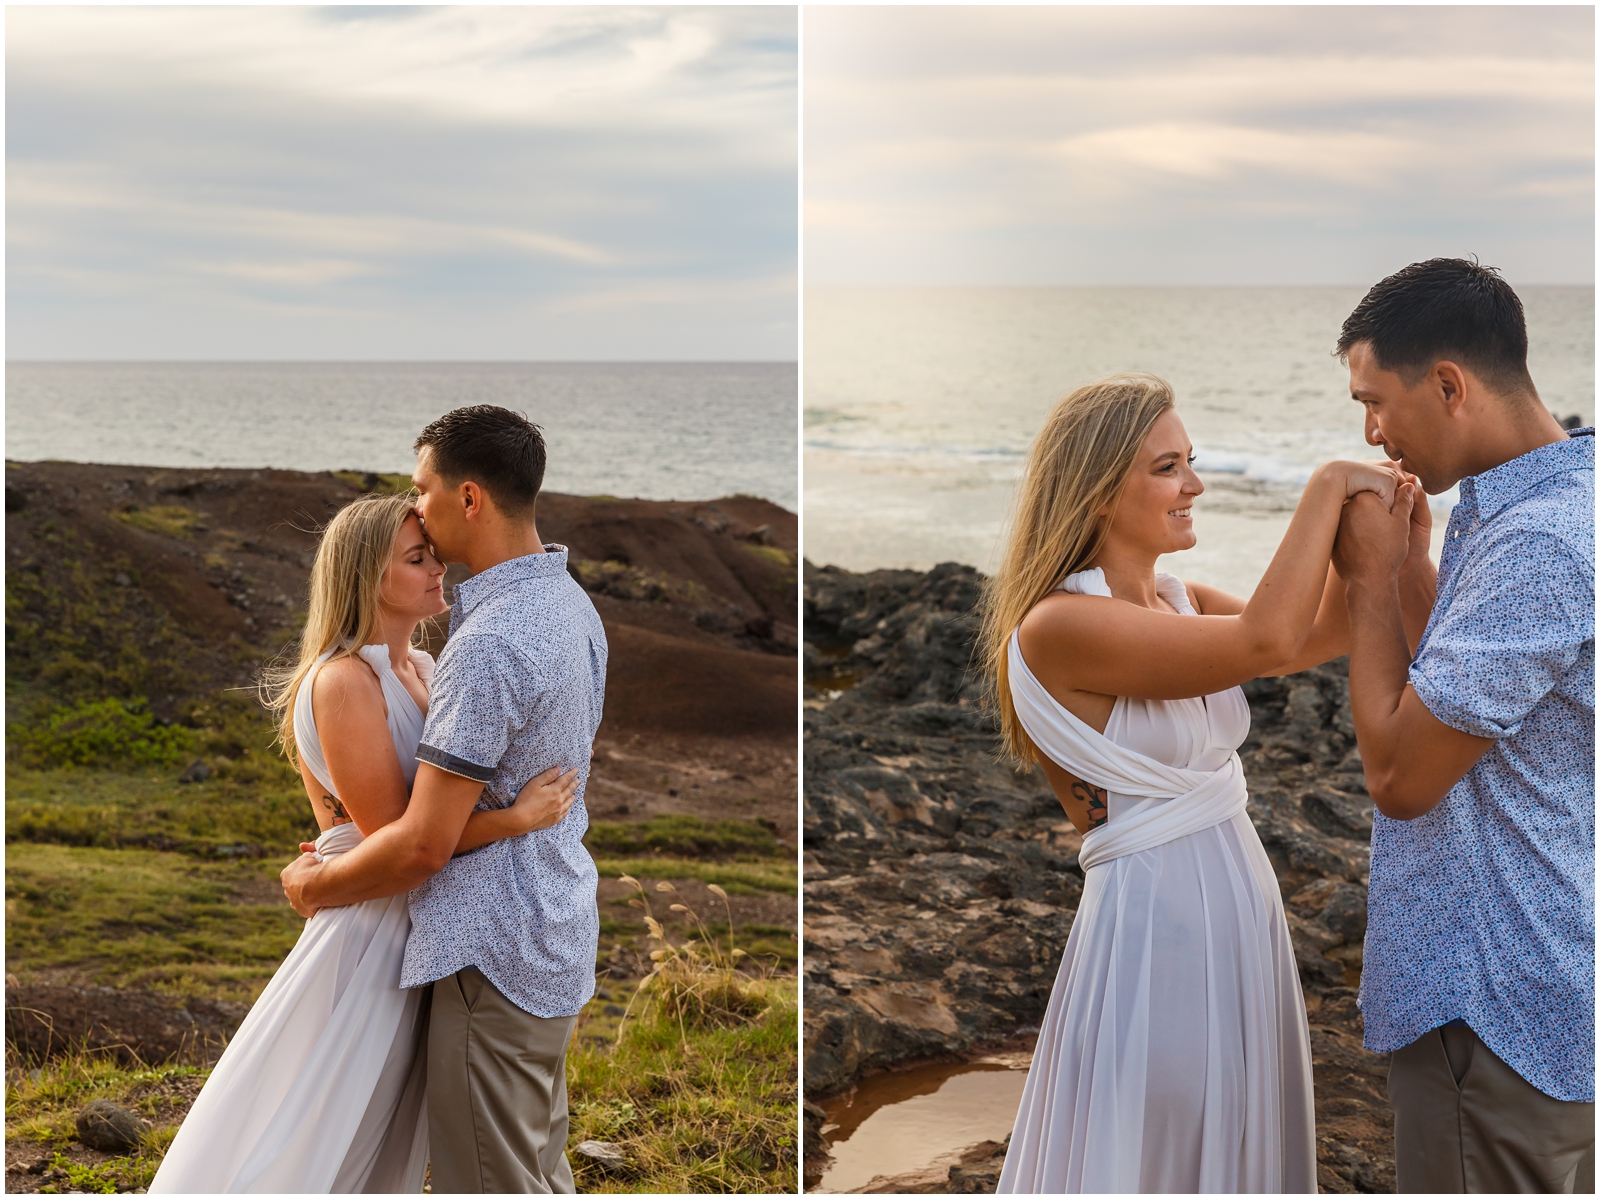 This couple eloped on the beach on Oahu.